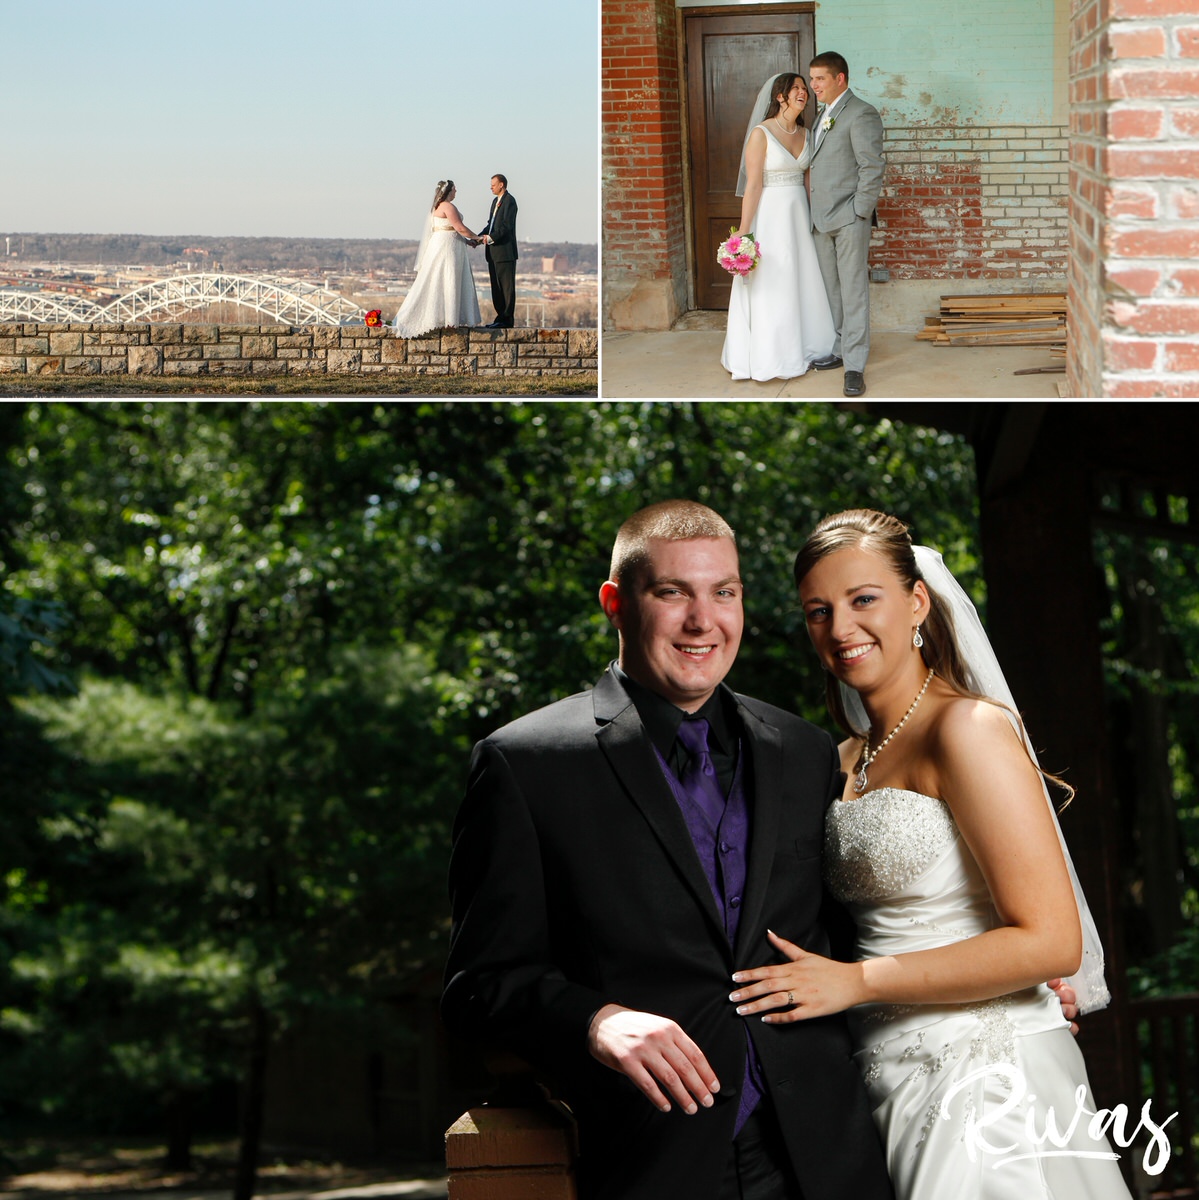 10 Years | A collage of three wedding photos of three different couples, all sharing an embrace on their wedding day. 